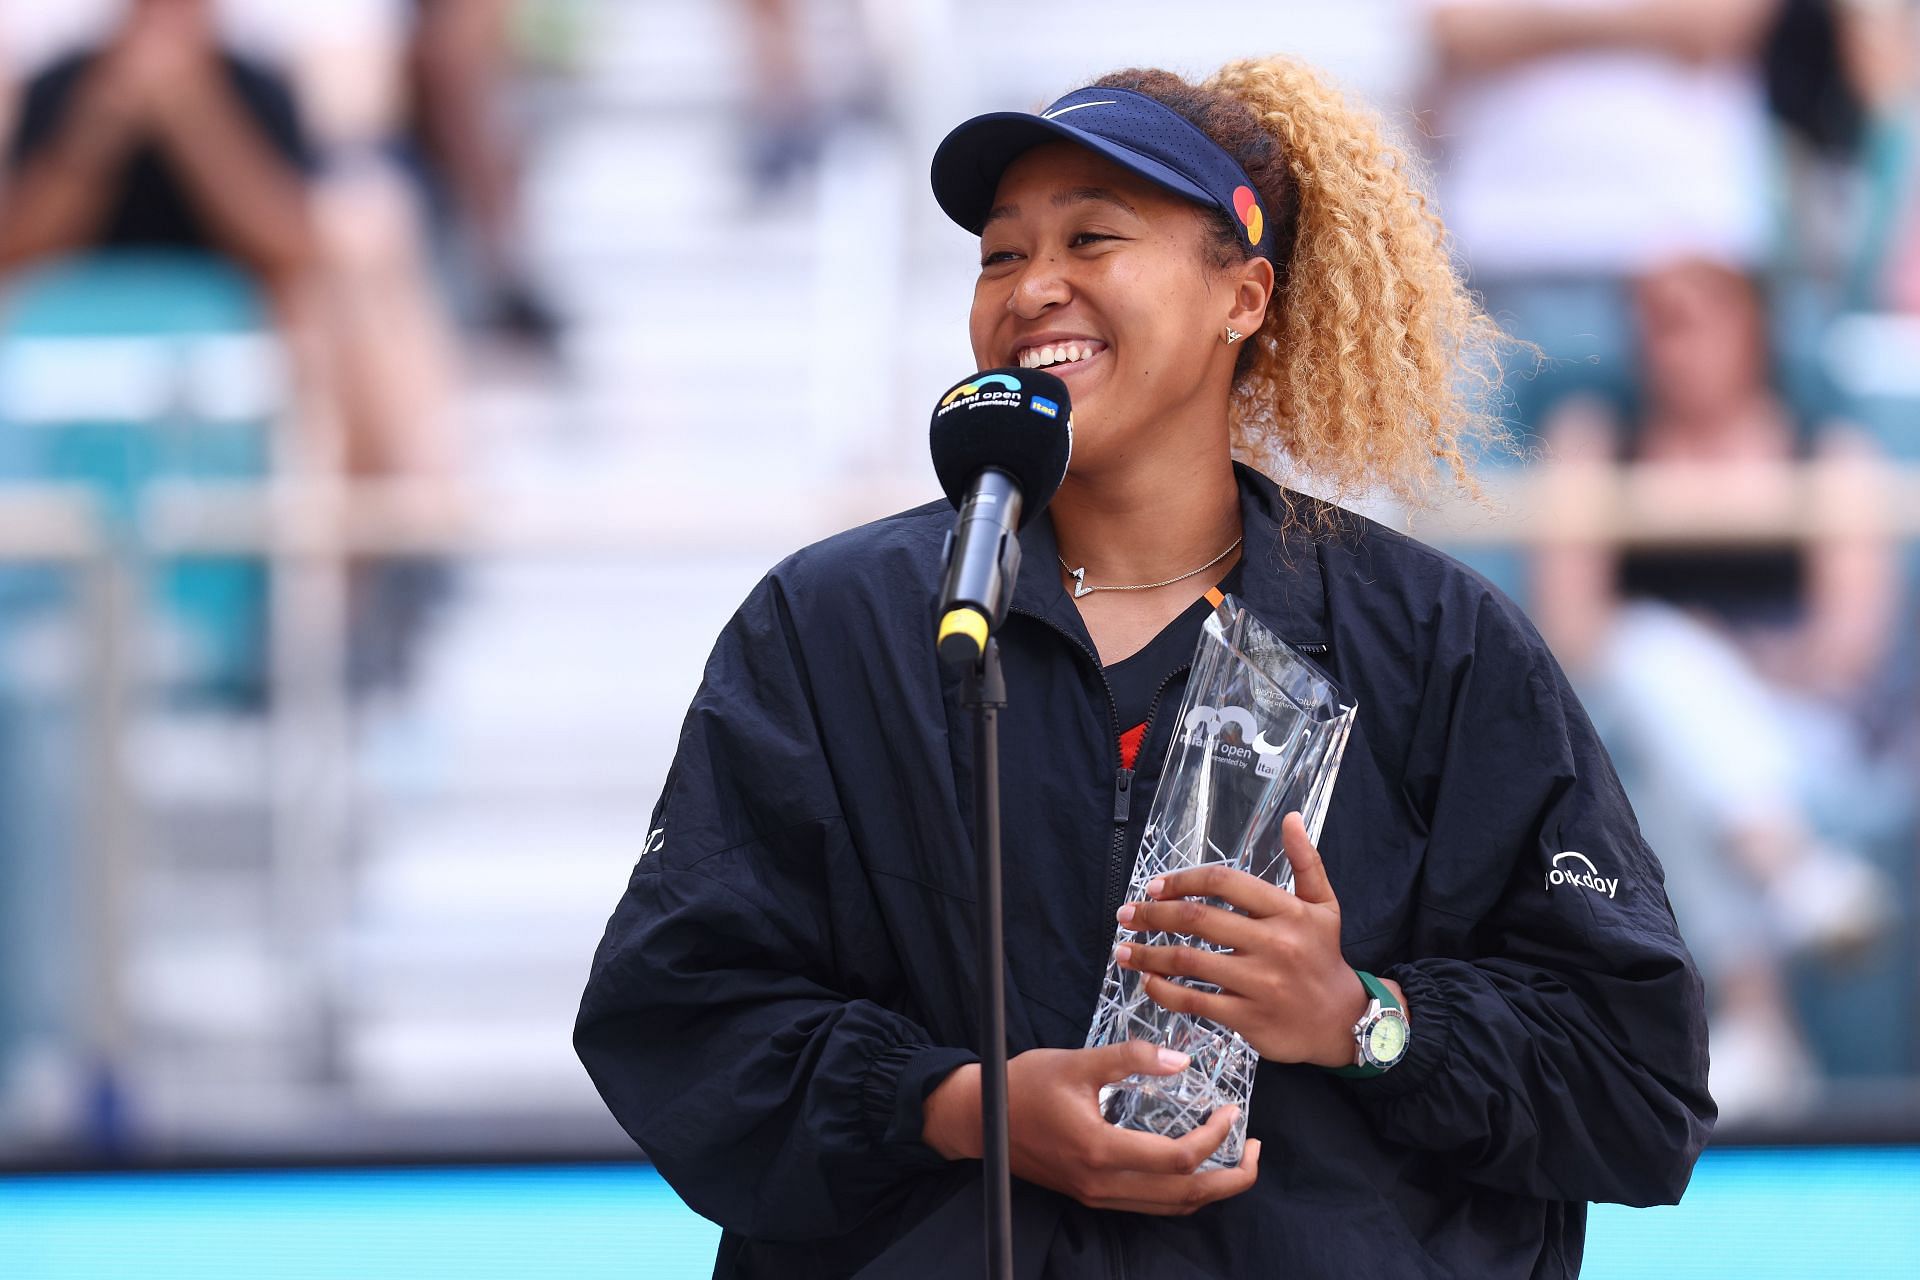 Naomi Osaka repeatedly thanks fans during her runner-up speech in Miami